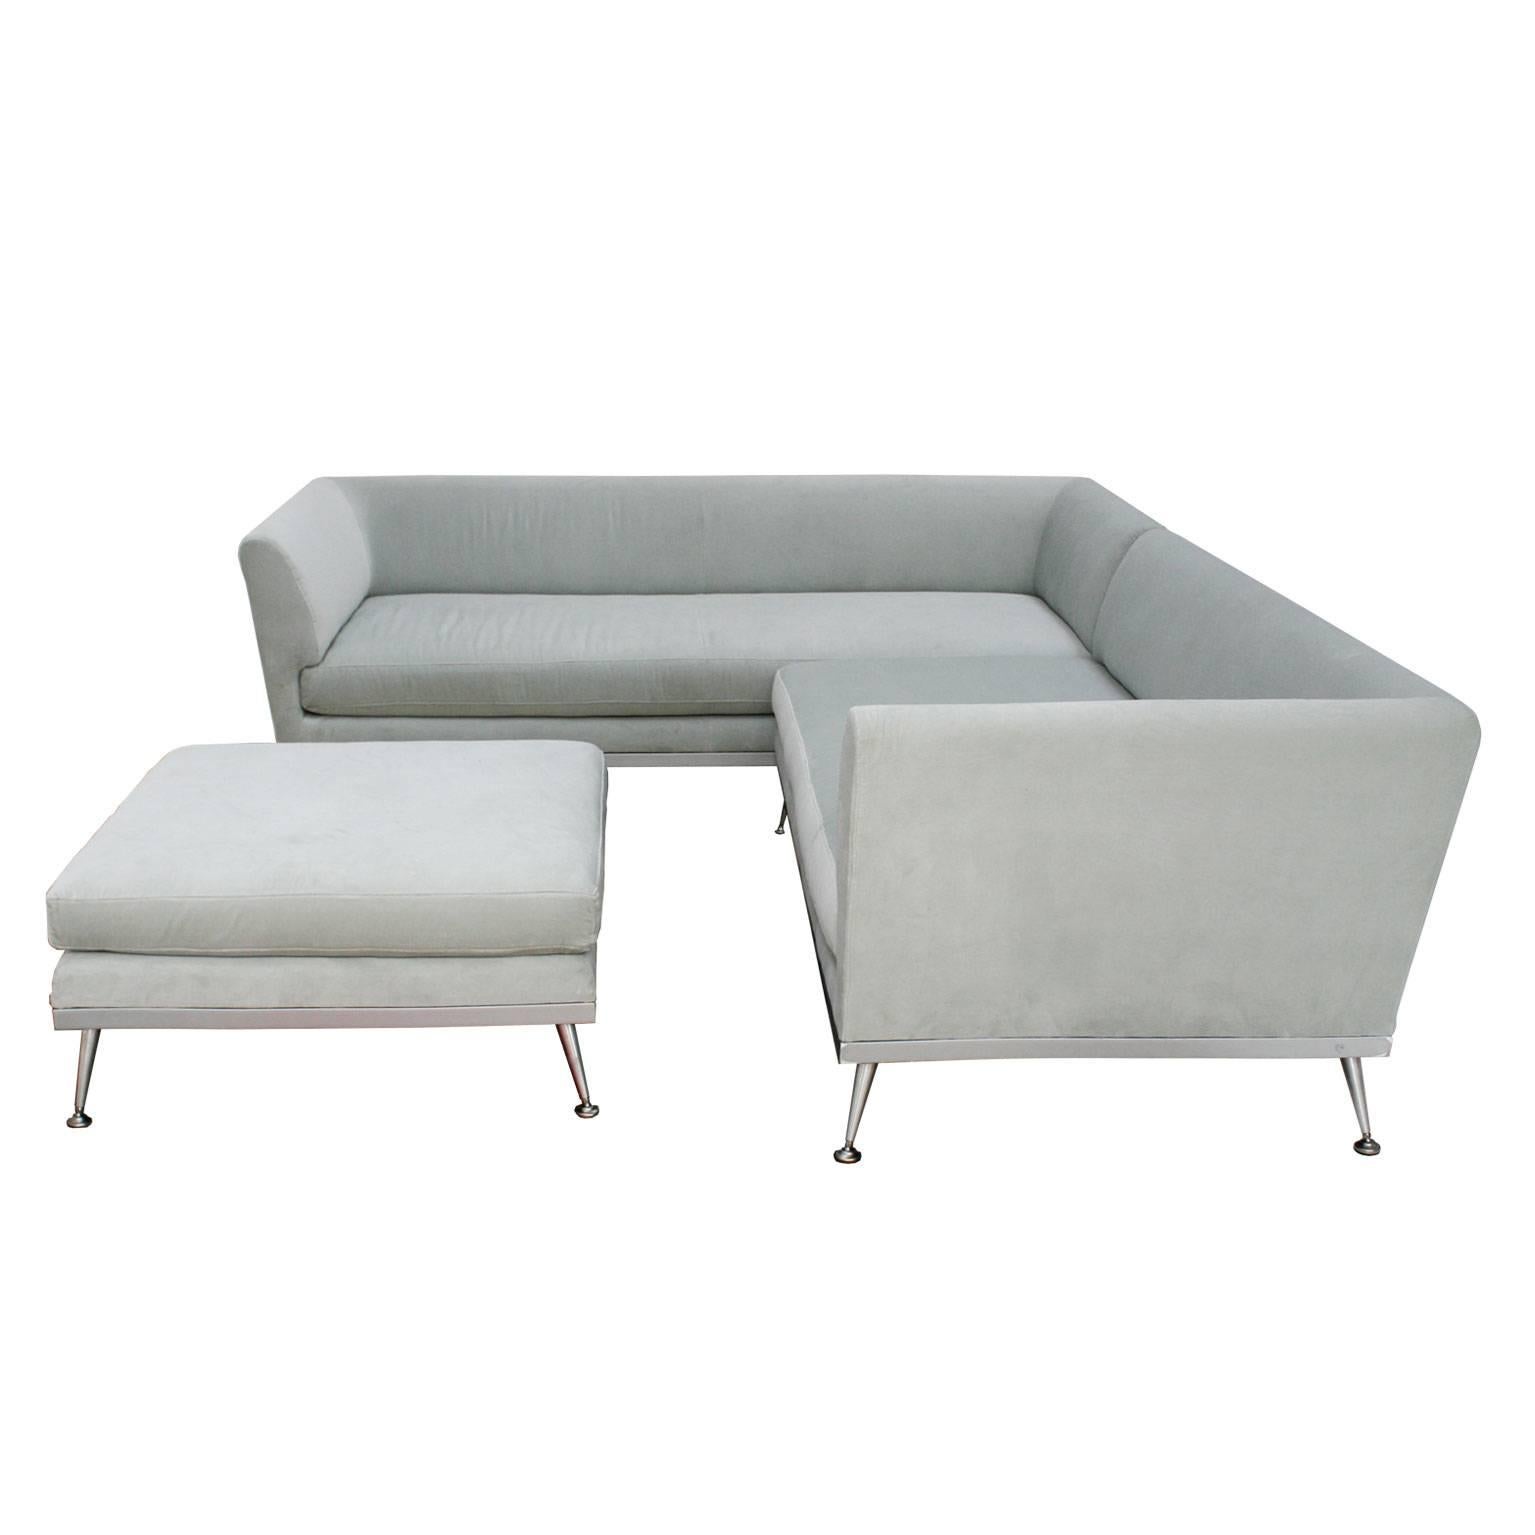 Contemporary modern sectional Italian sofa. The set is composed of two independent sections in L-shape with different measurements (L 295 x D 90 x 40/70 (H) cm, L 215 x D 90 x 40/70 (H) cm) and square footstool of measurements L 85 x D 85 x 40 (H)